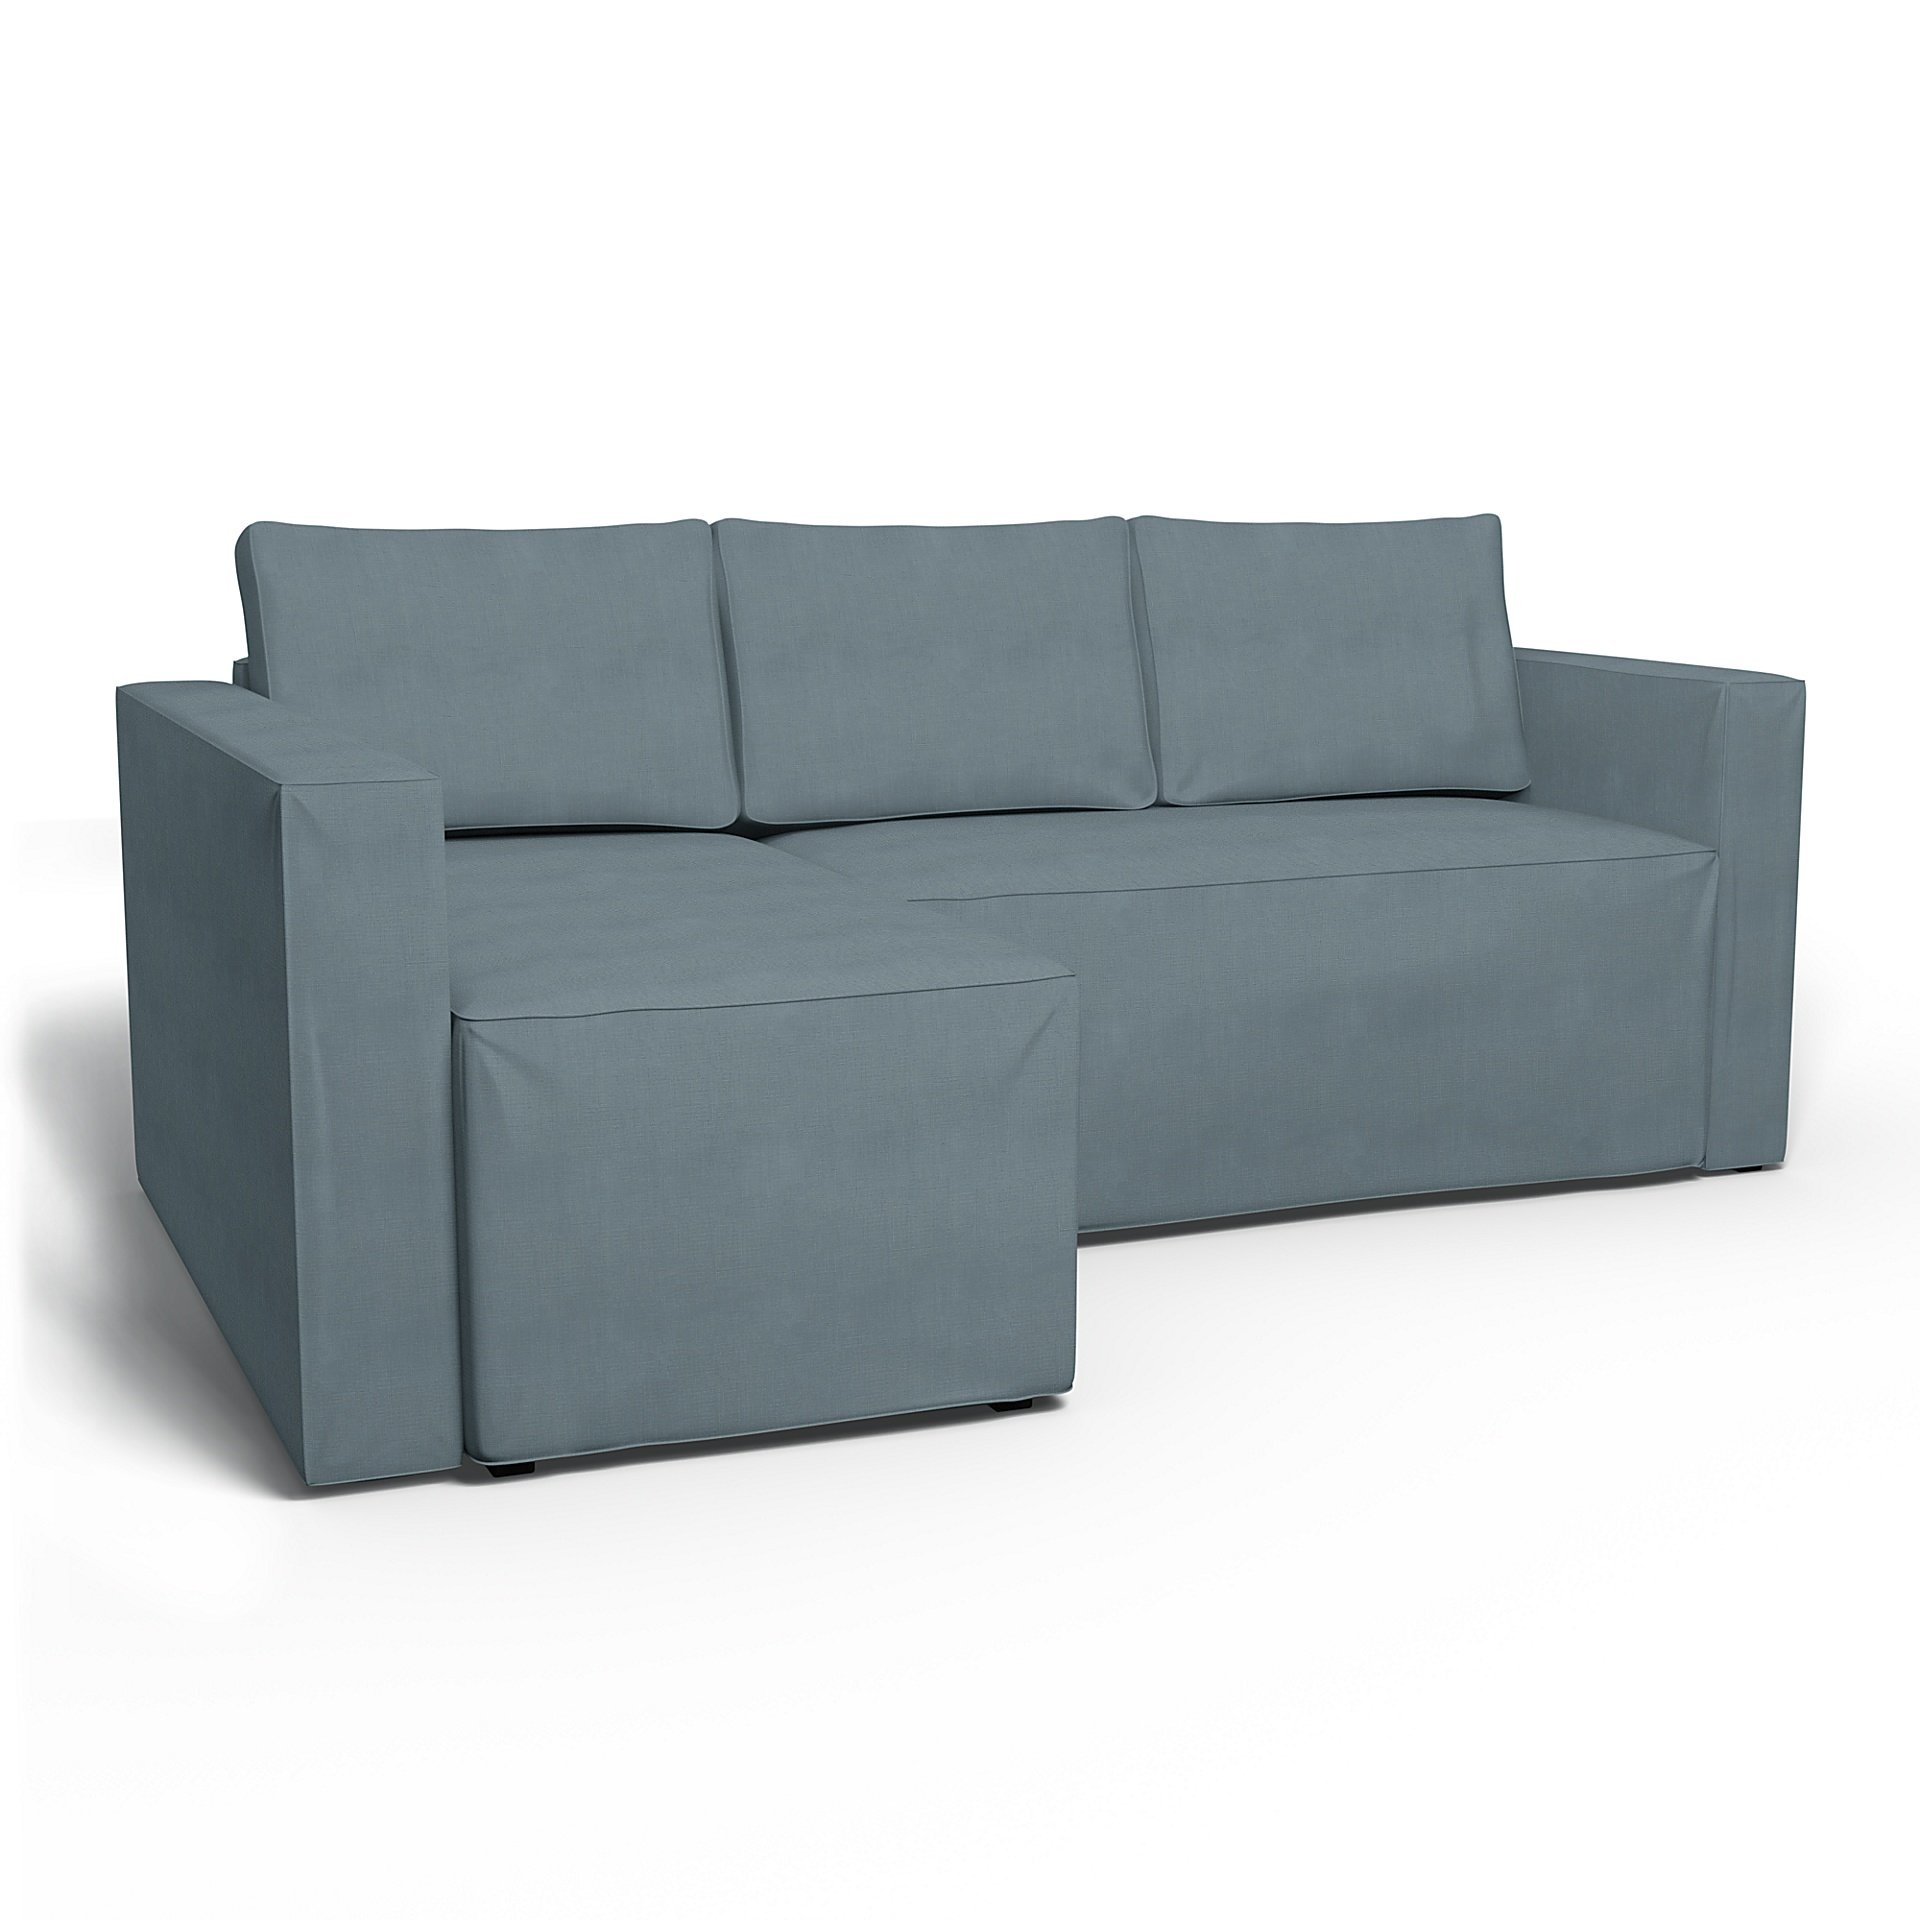 IKEA - Manstad Sofa Bed with Left Chaise Cover, Dusk, Linen - Bemz